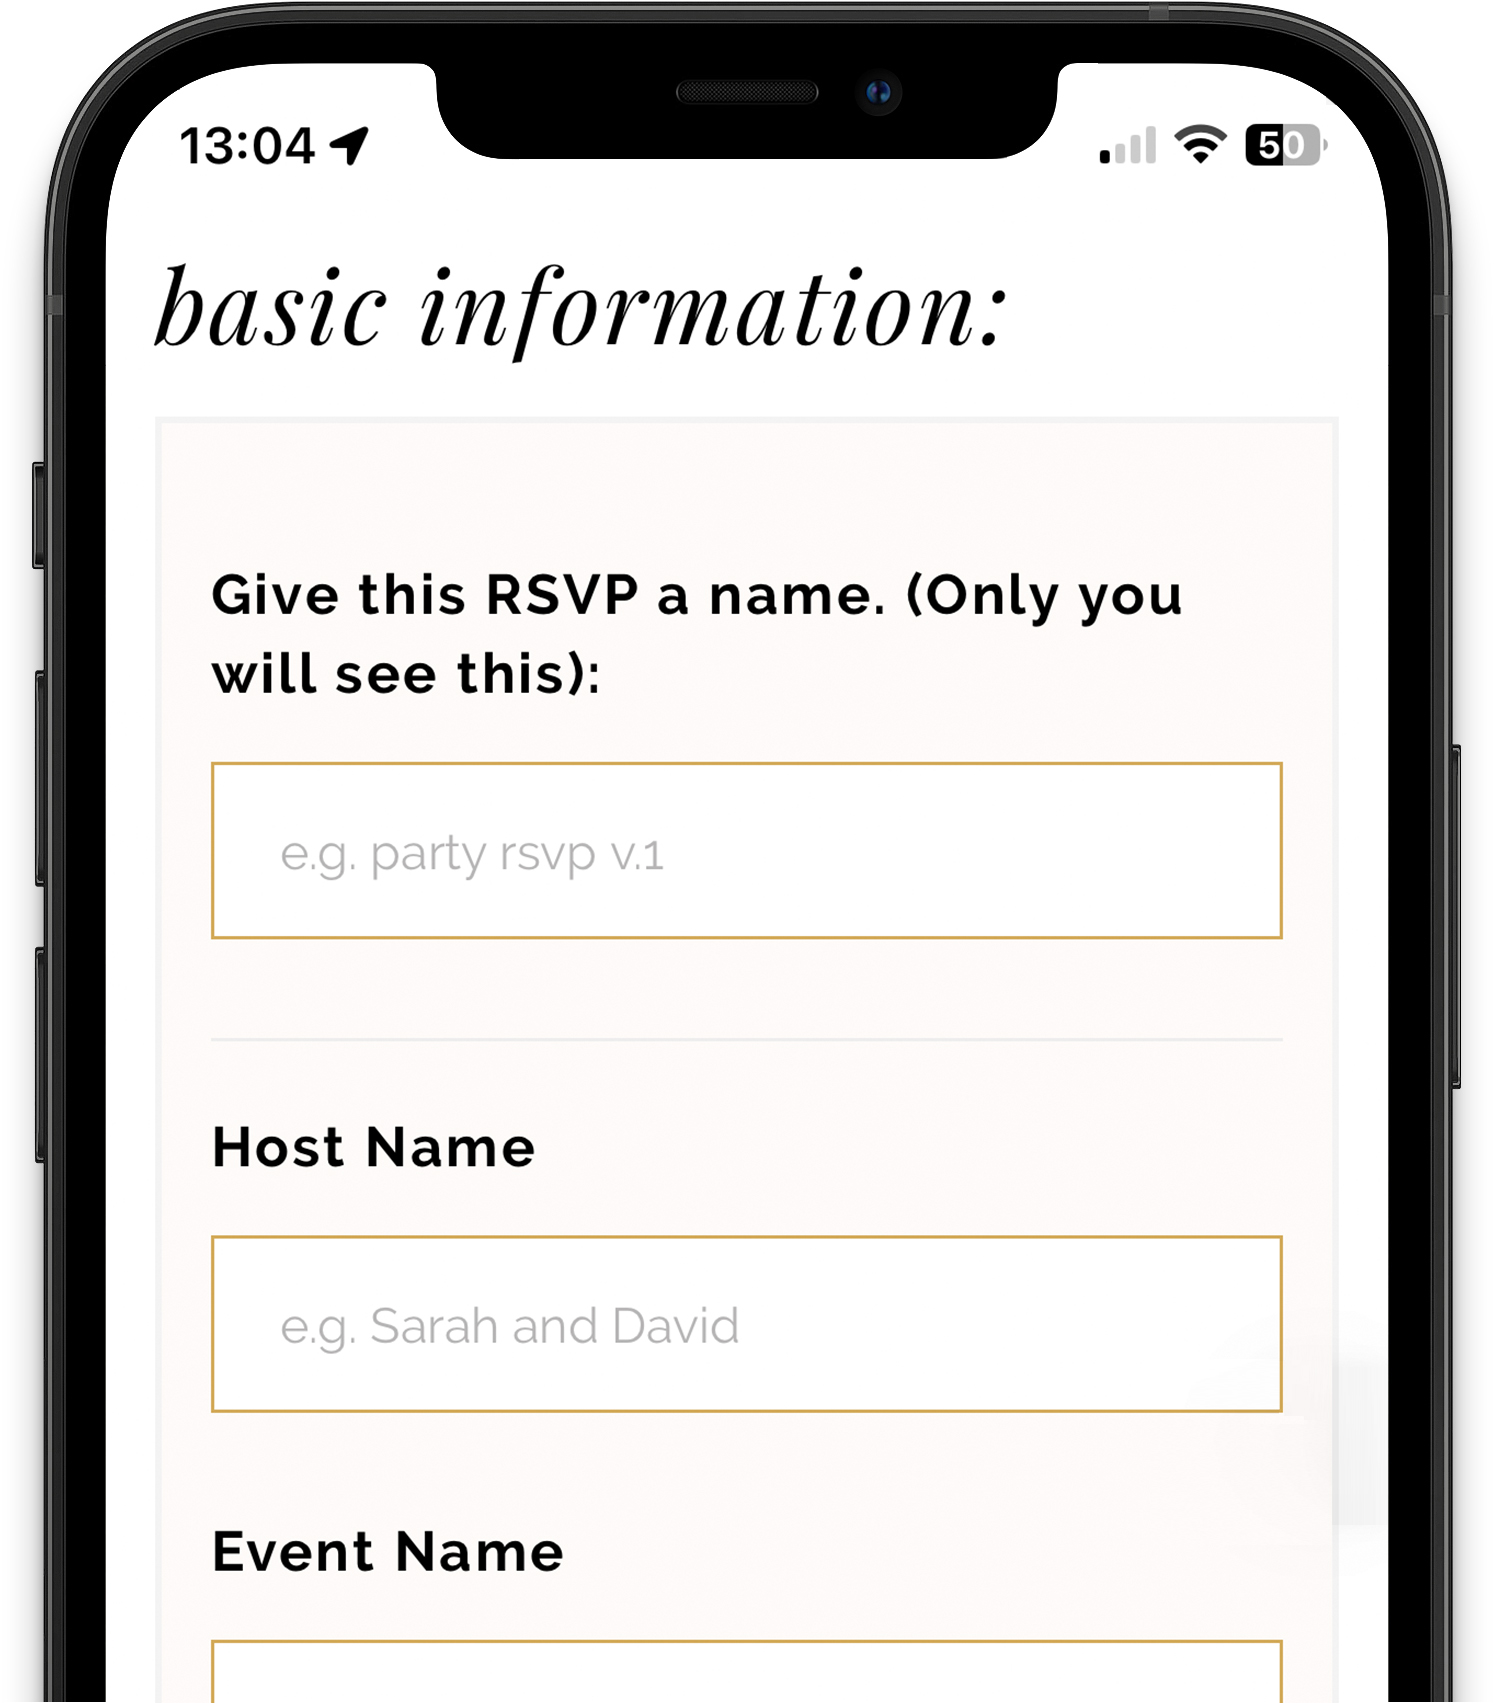 A form where users can create a digital funeral RSVP online